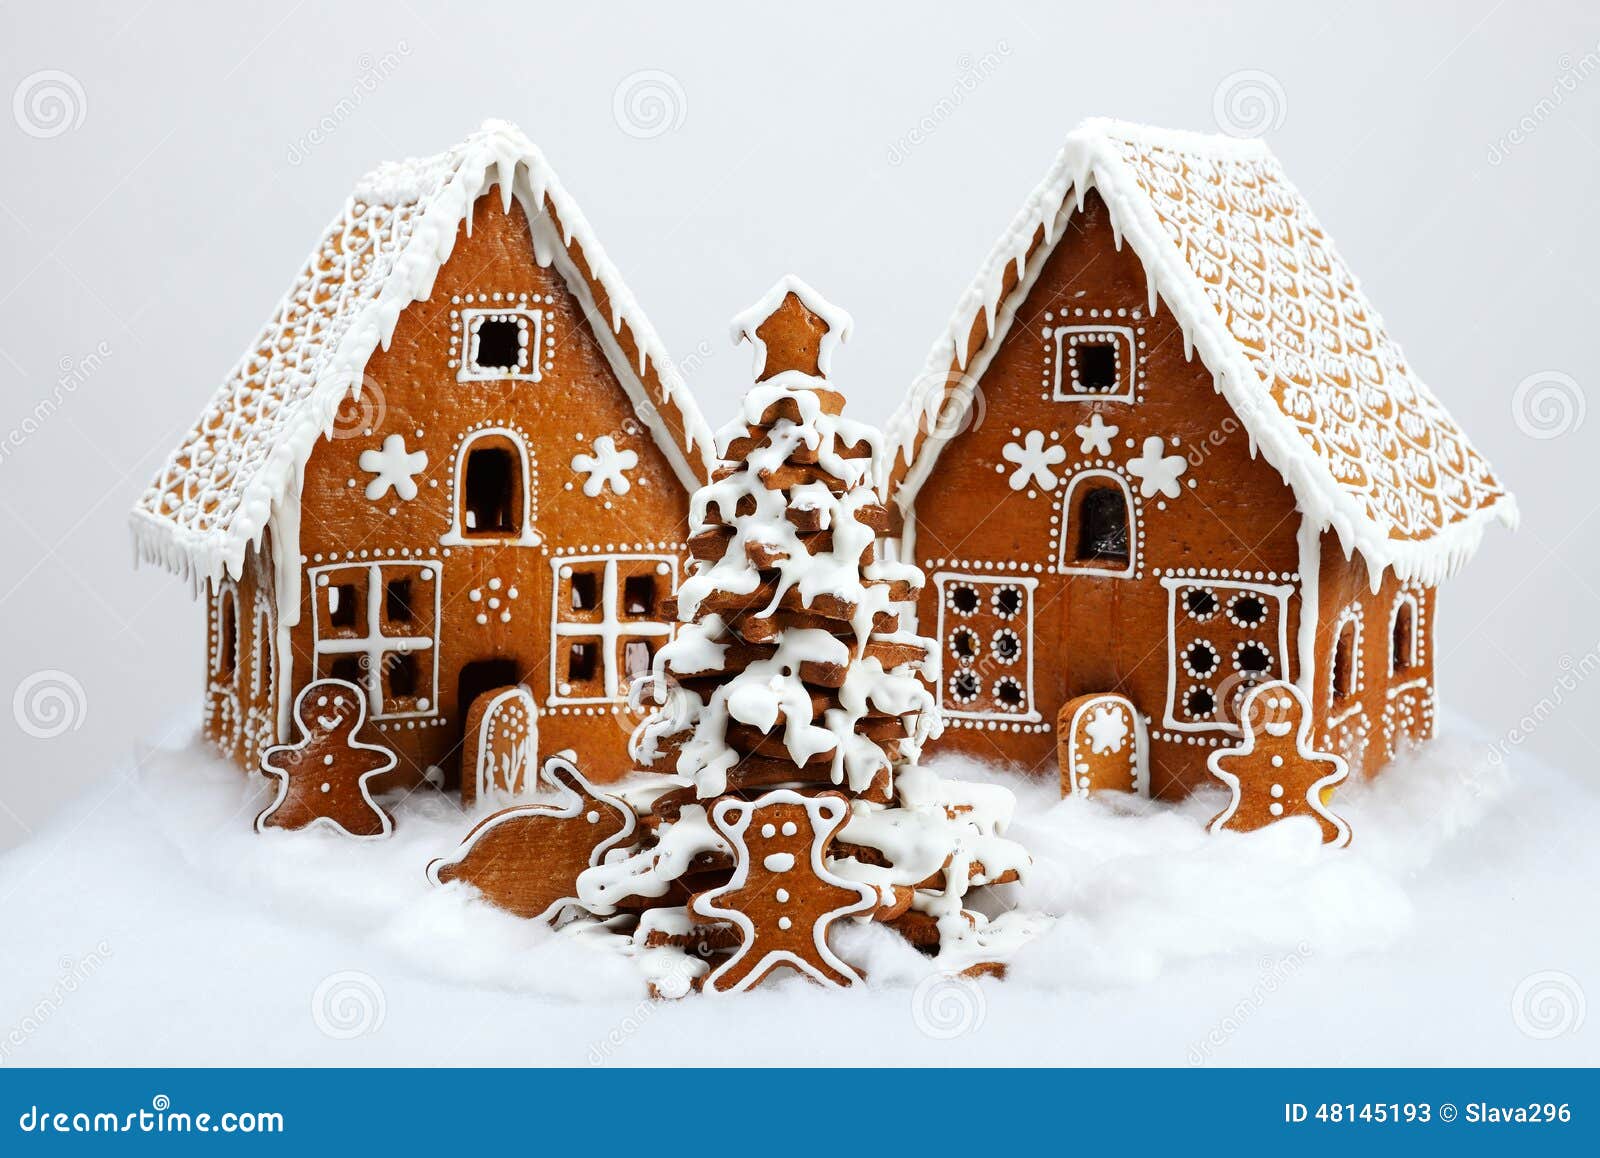 the hand-made eatable gingerbread houses